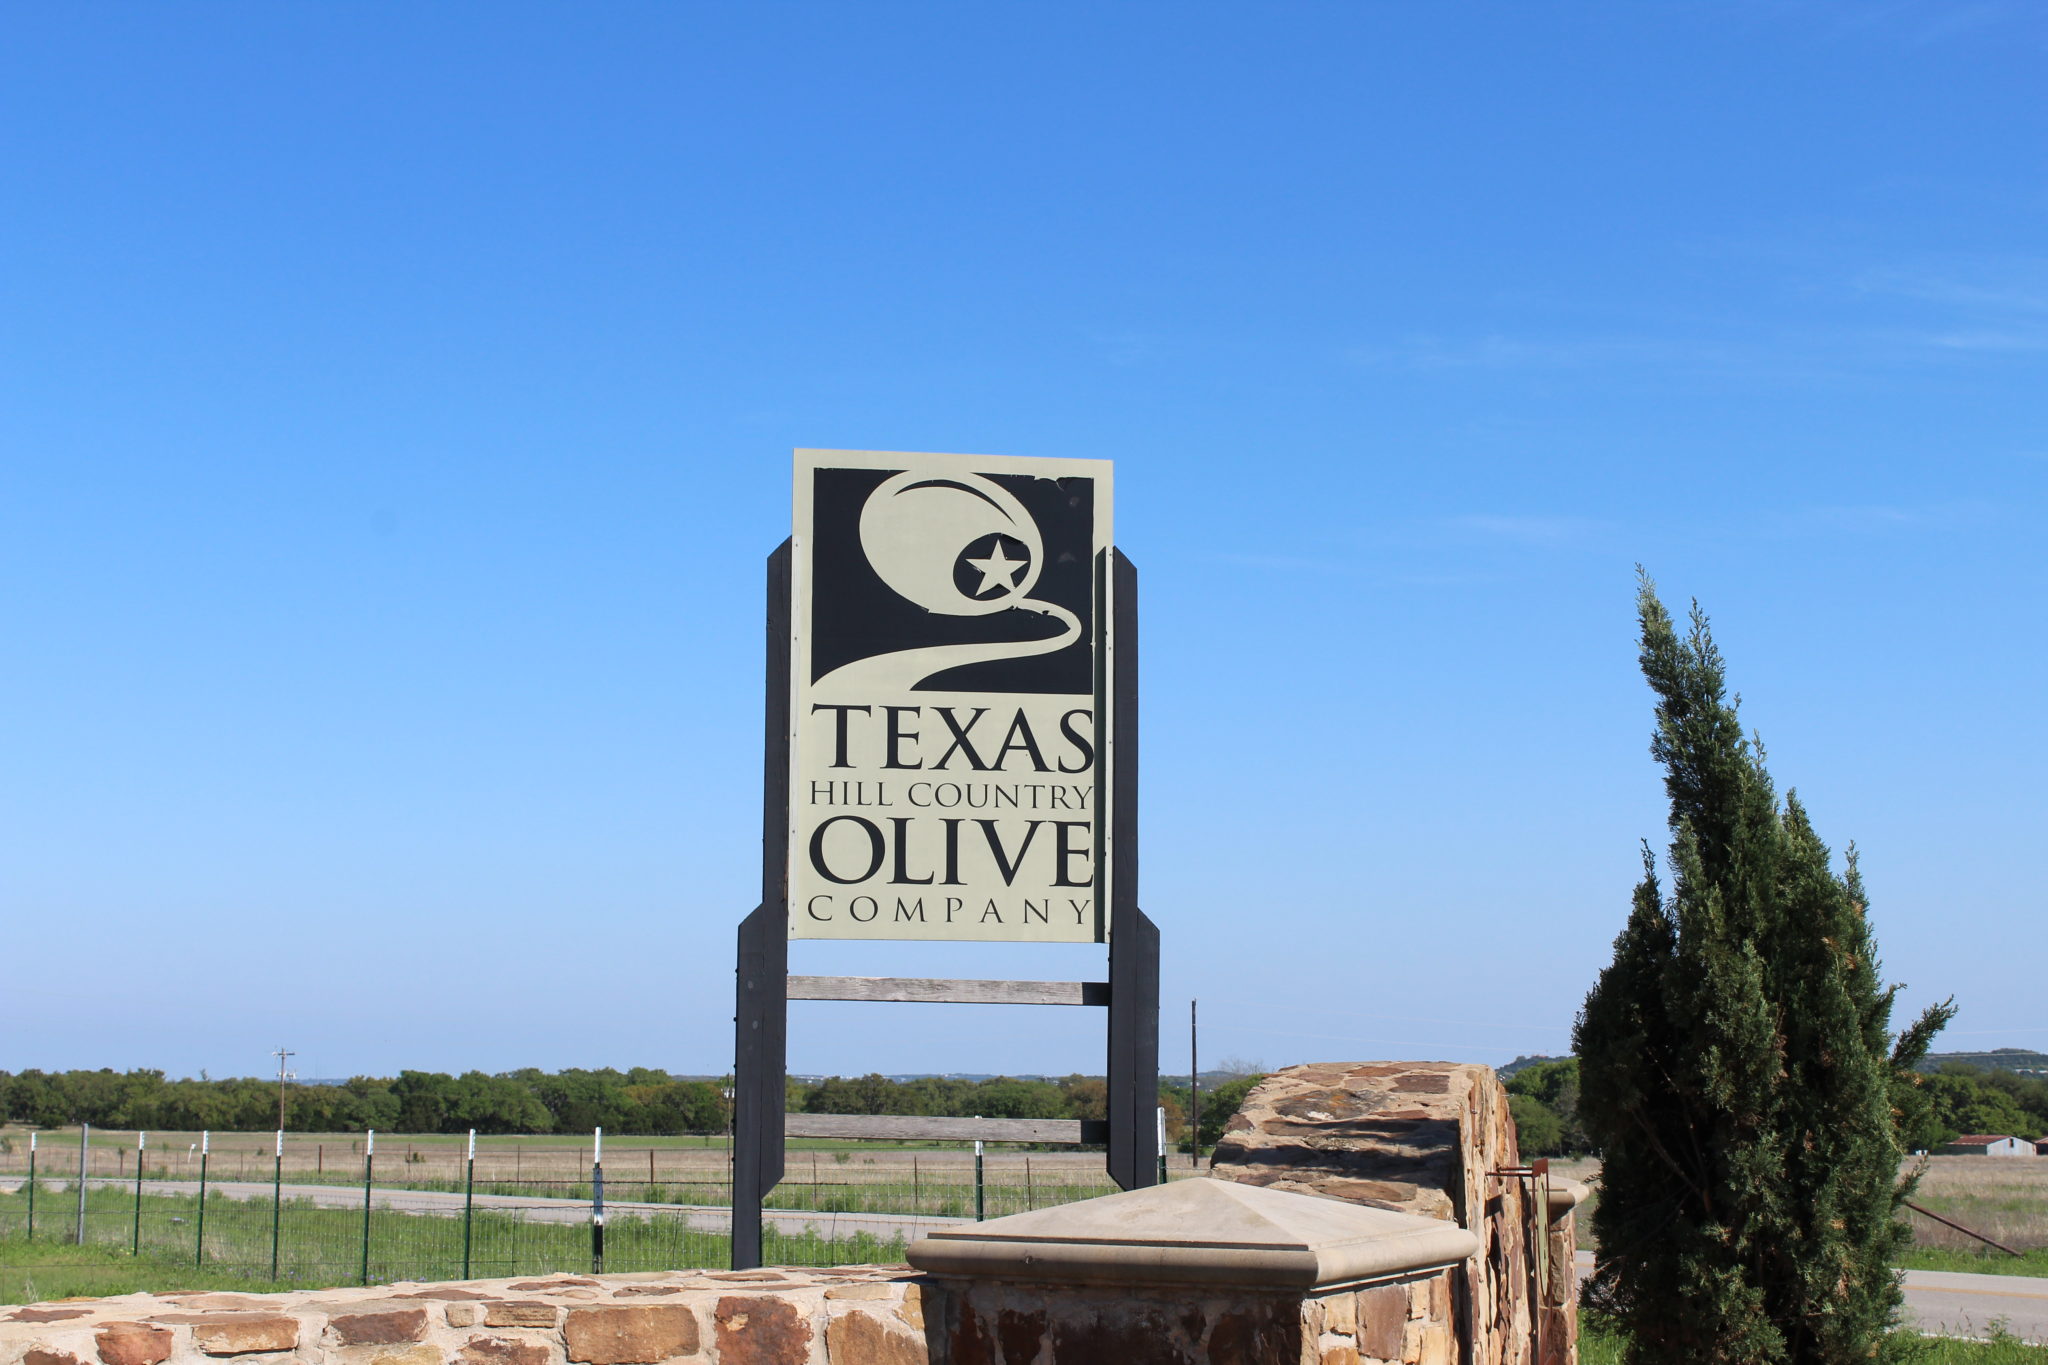 Olive Oil made in Texas